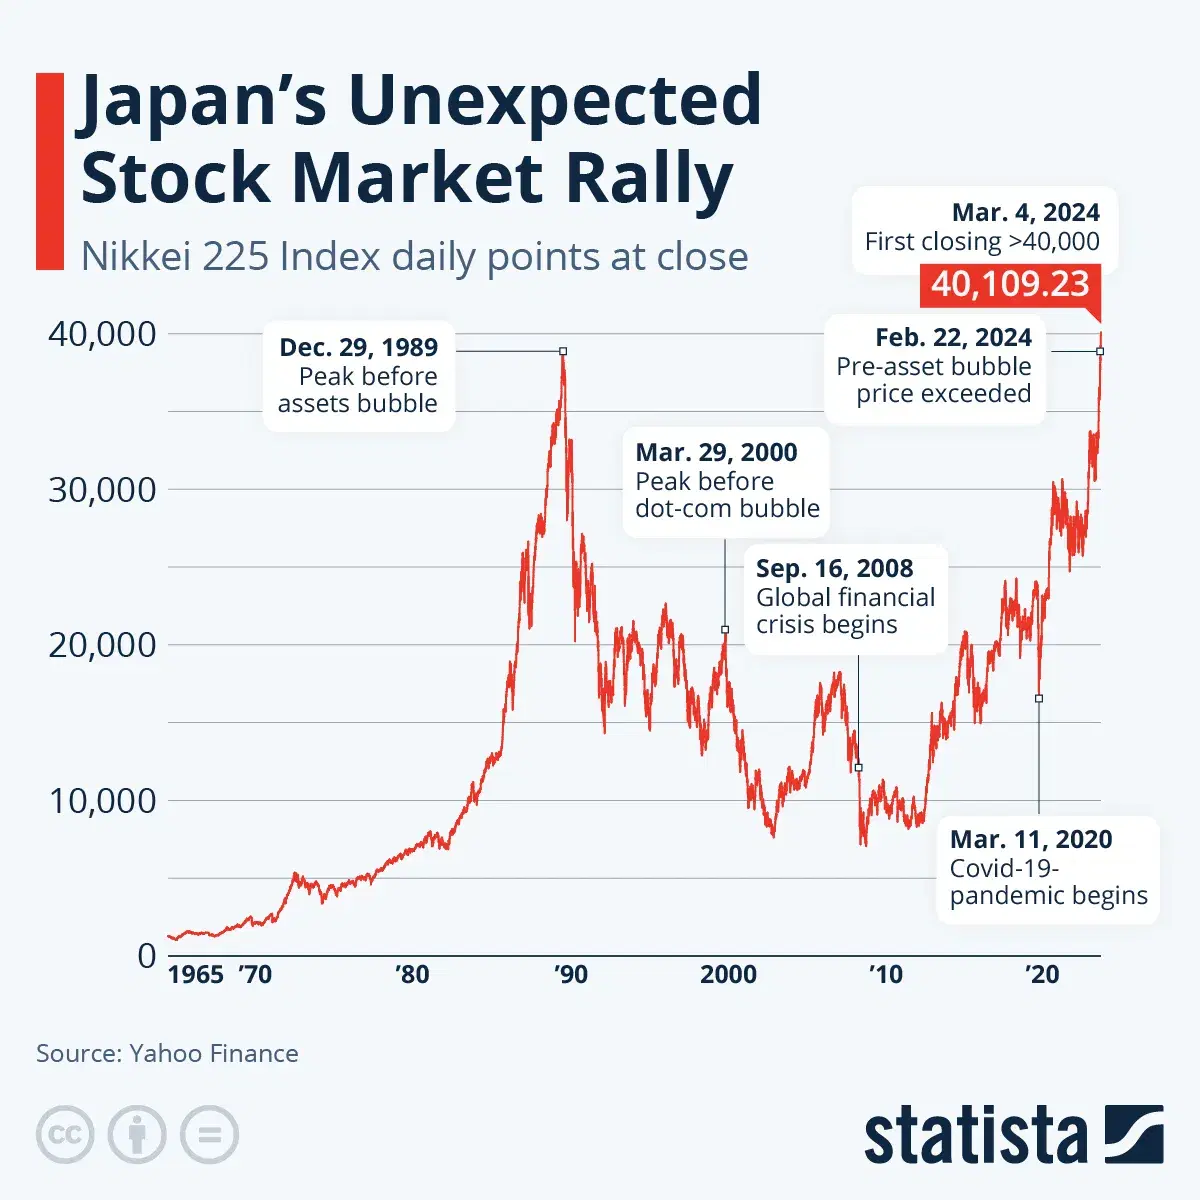 Japan's Unexpected Stock Market Rally